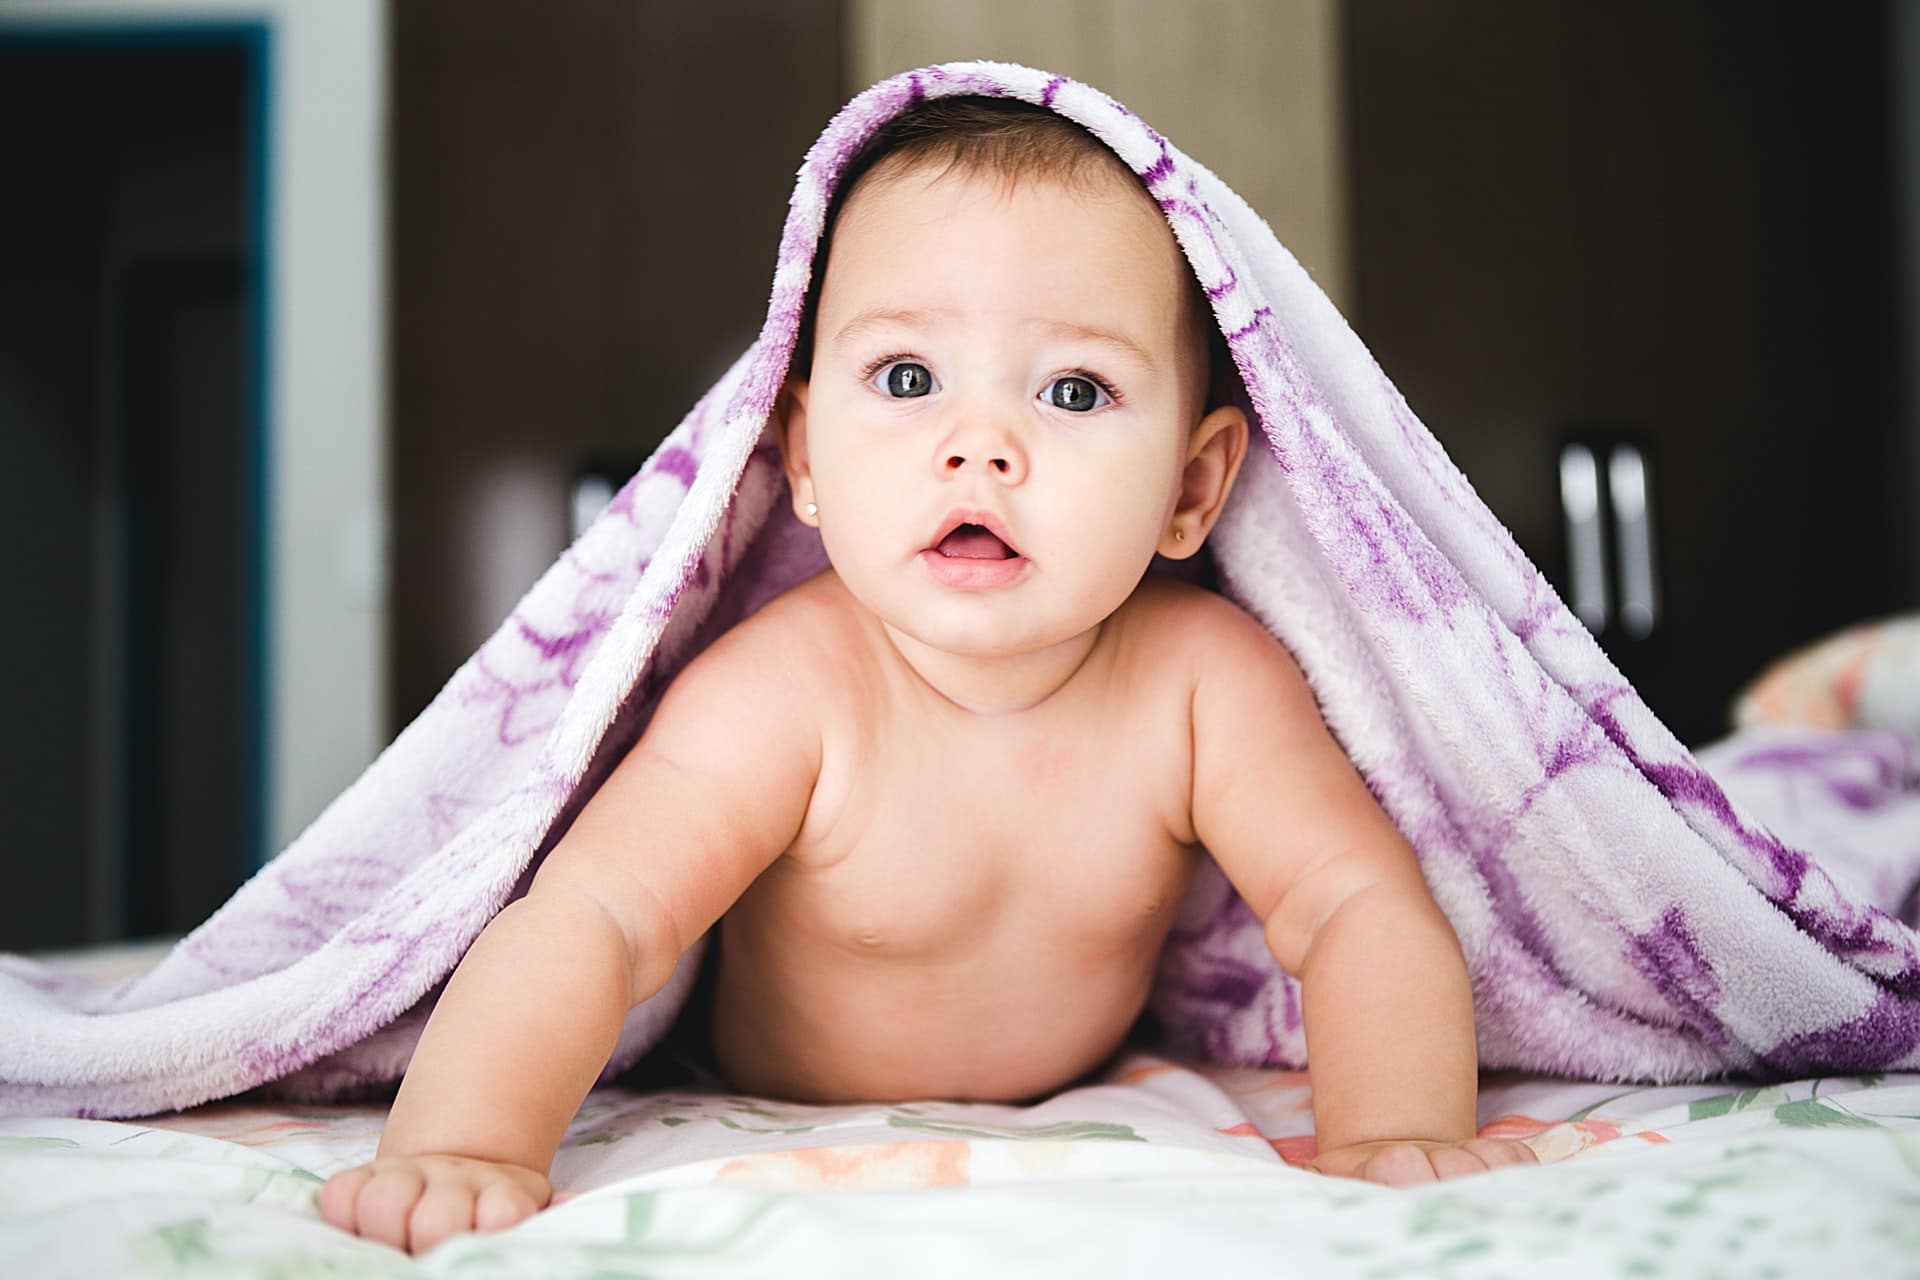 jonathan borba CgWTqYxHEkg unsplash - Unique and Latest American Baby Boy Names With Meanings of 2021